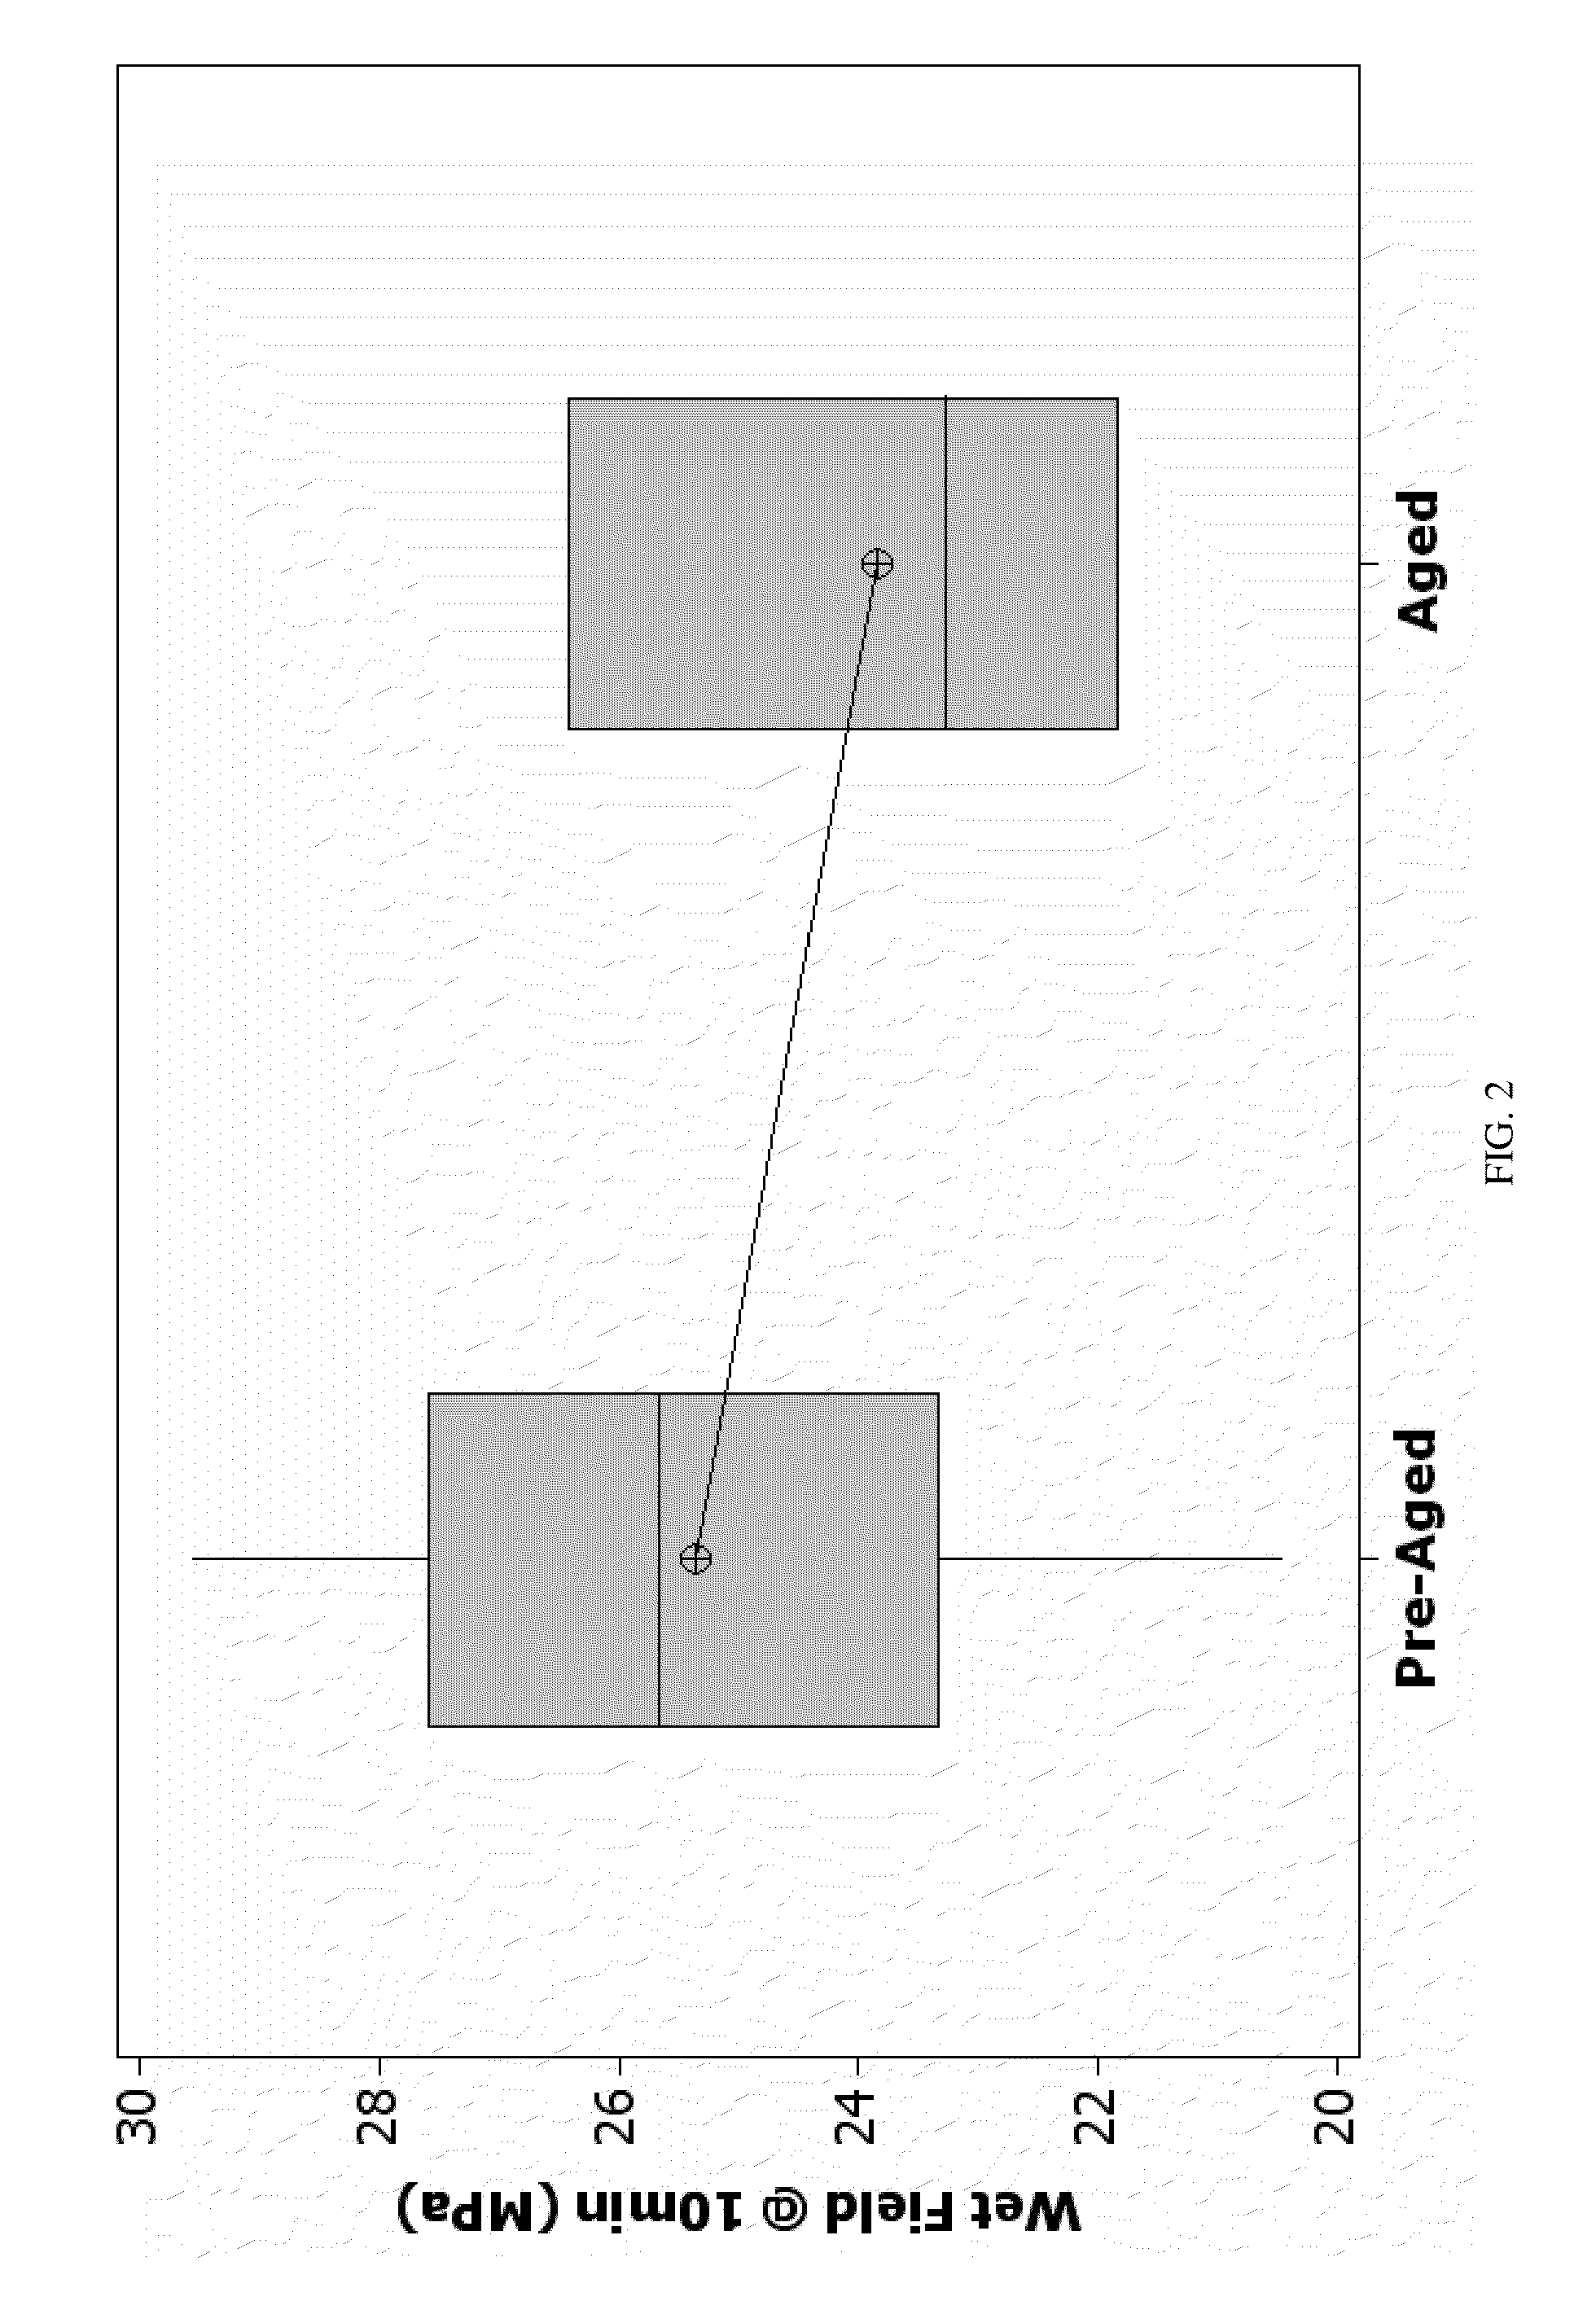 Post irradiation shelf-stable dual paste direct injectable bone cement precursor systems and methods of making same